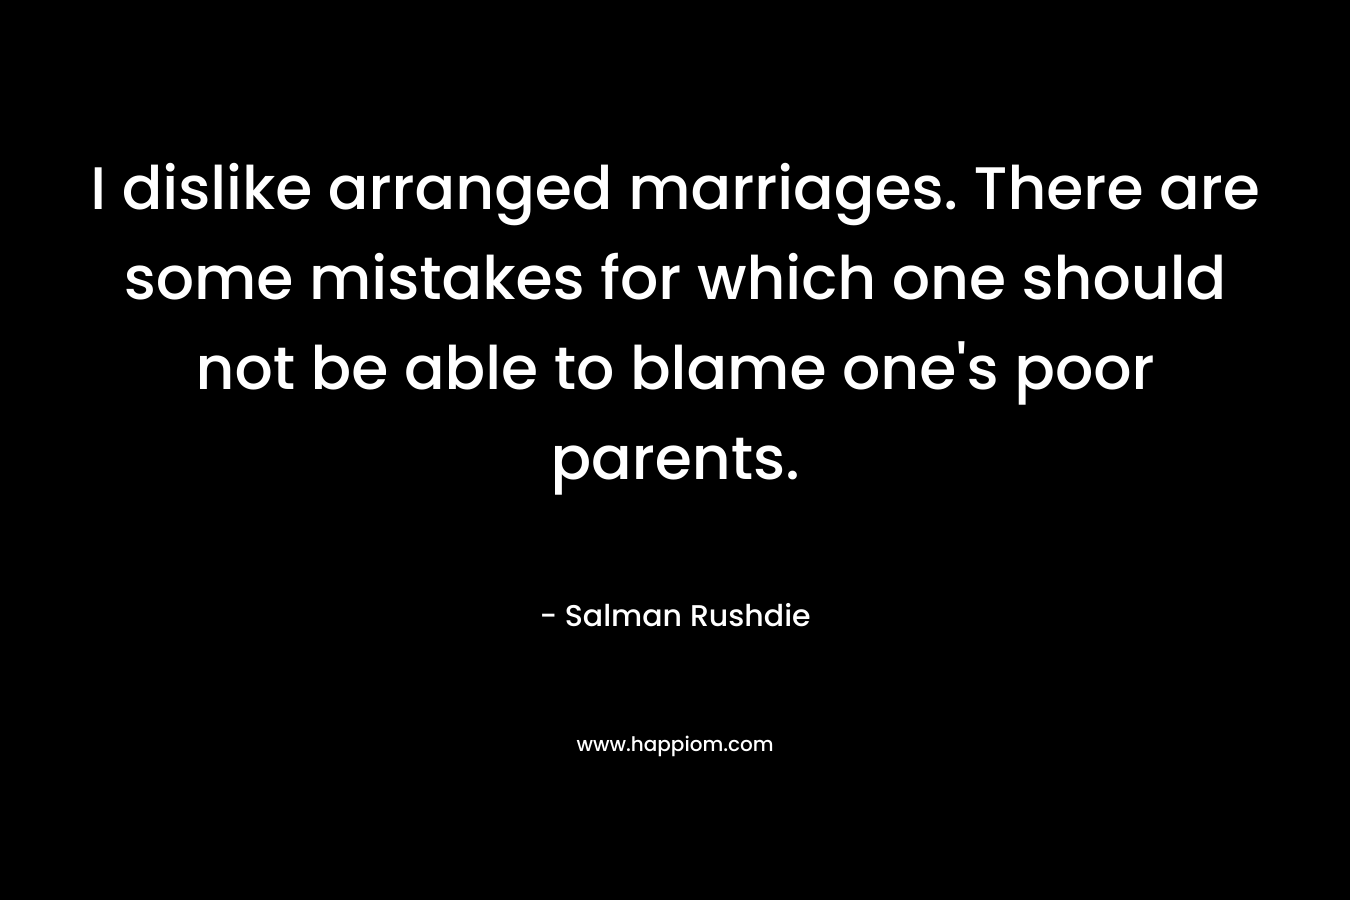 I dislike arranged marriages. There are some mistakes for which one should not be able to blame one’s poor parents. – Salman Rushdie